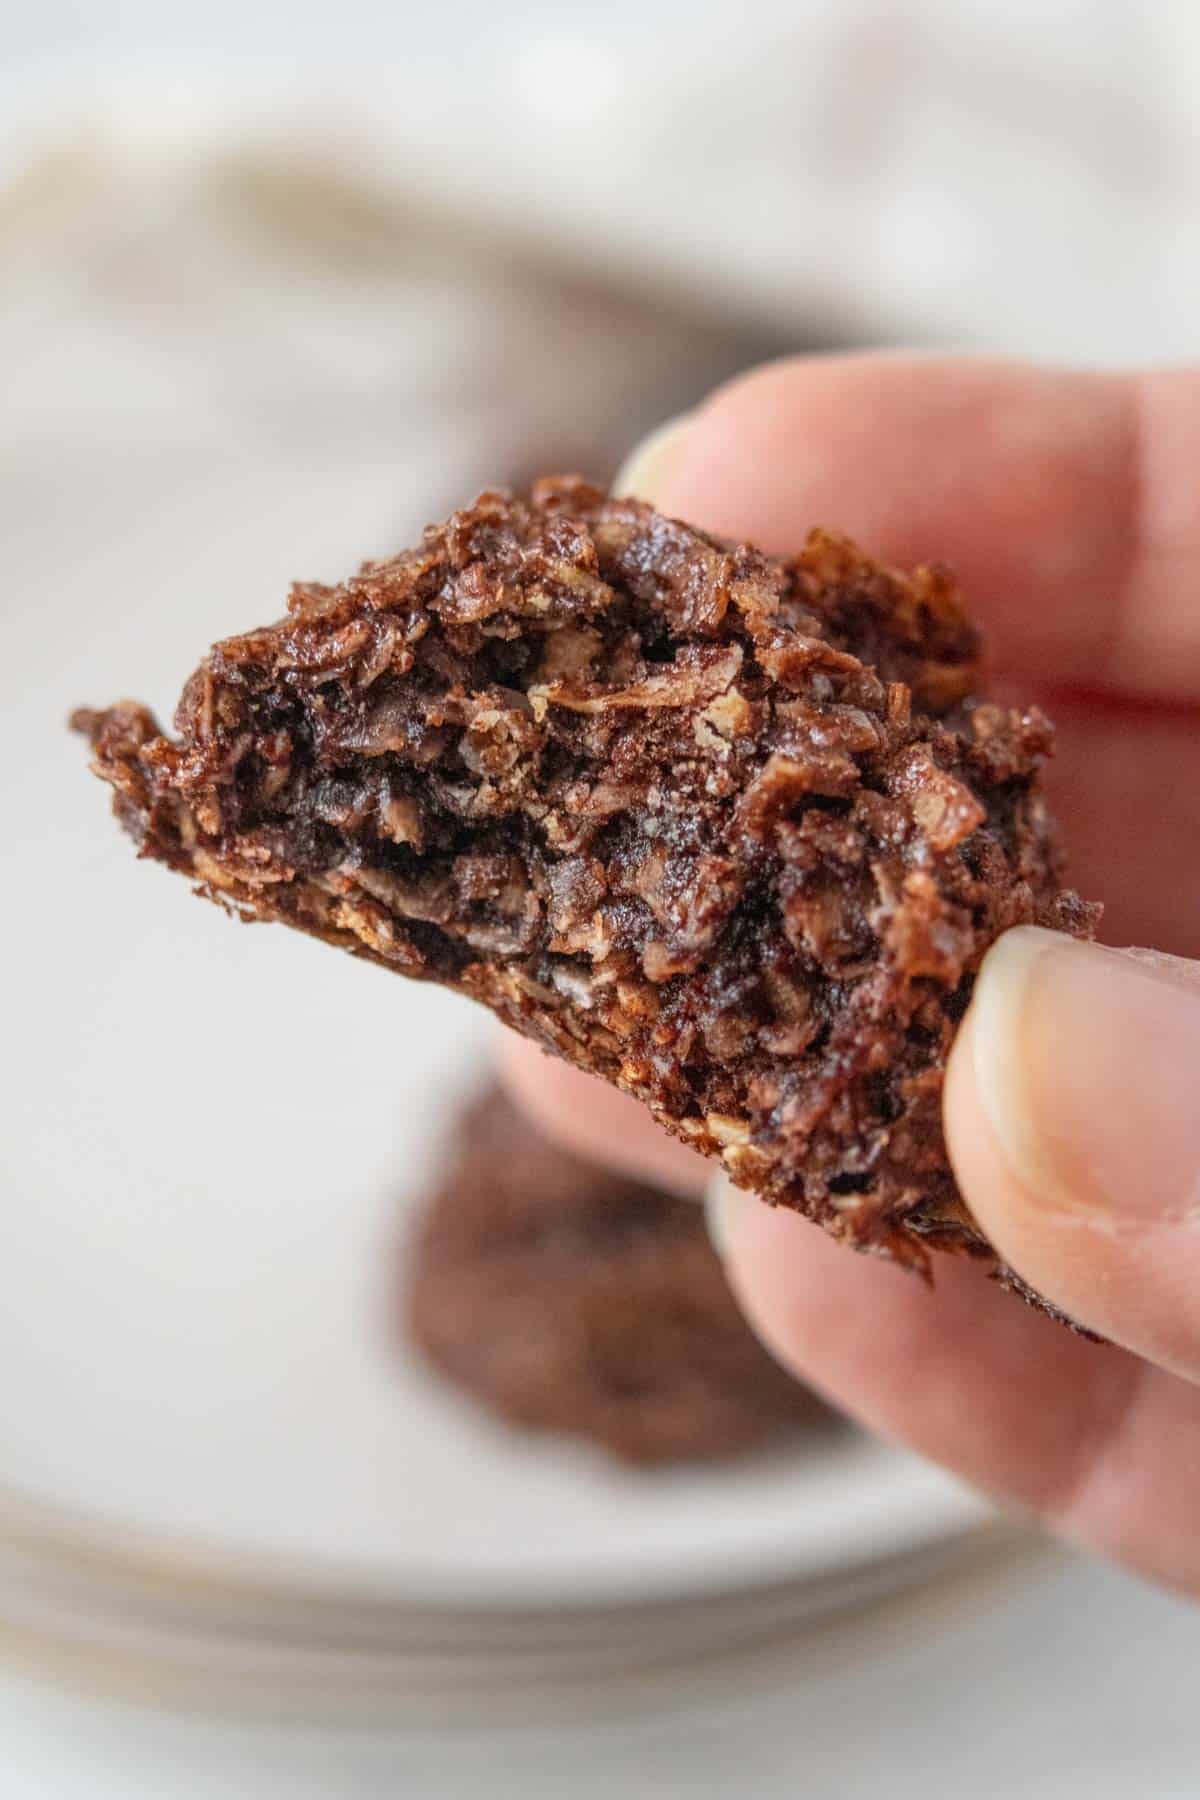 A person holding a piece of chocolate macaroon cookies on a plate.